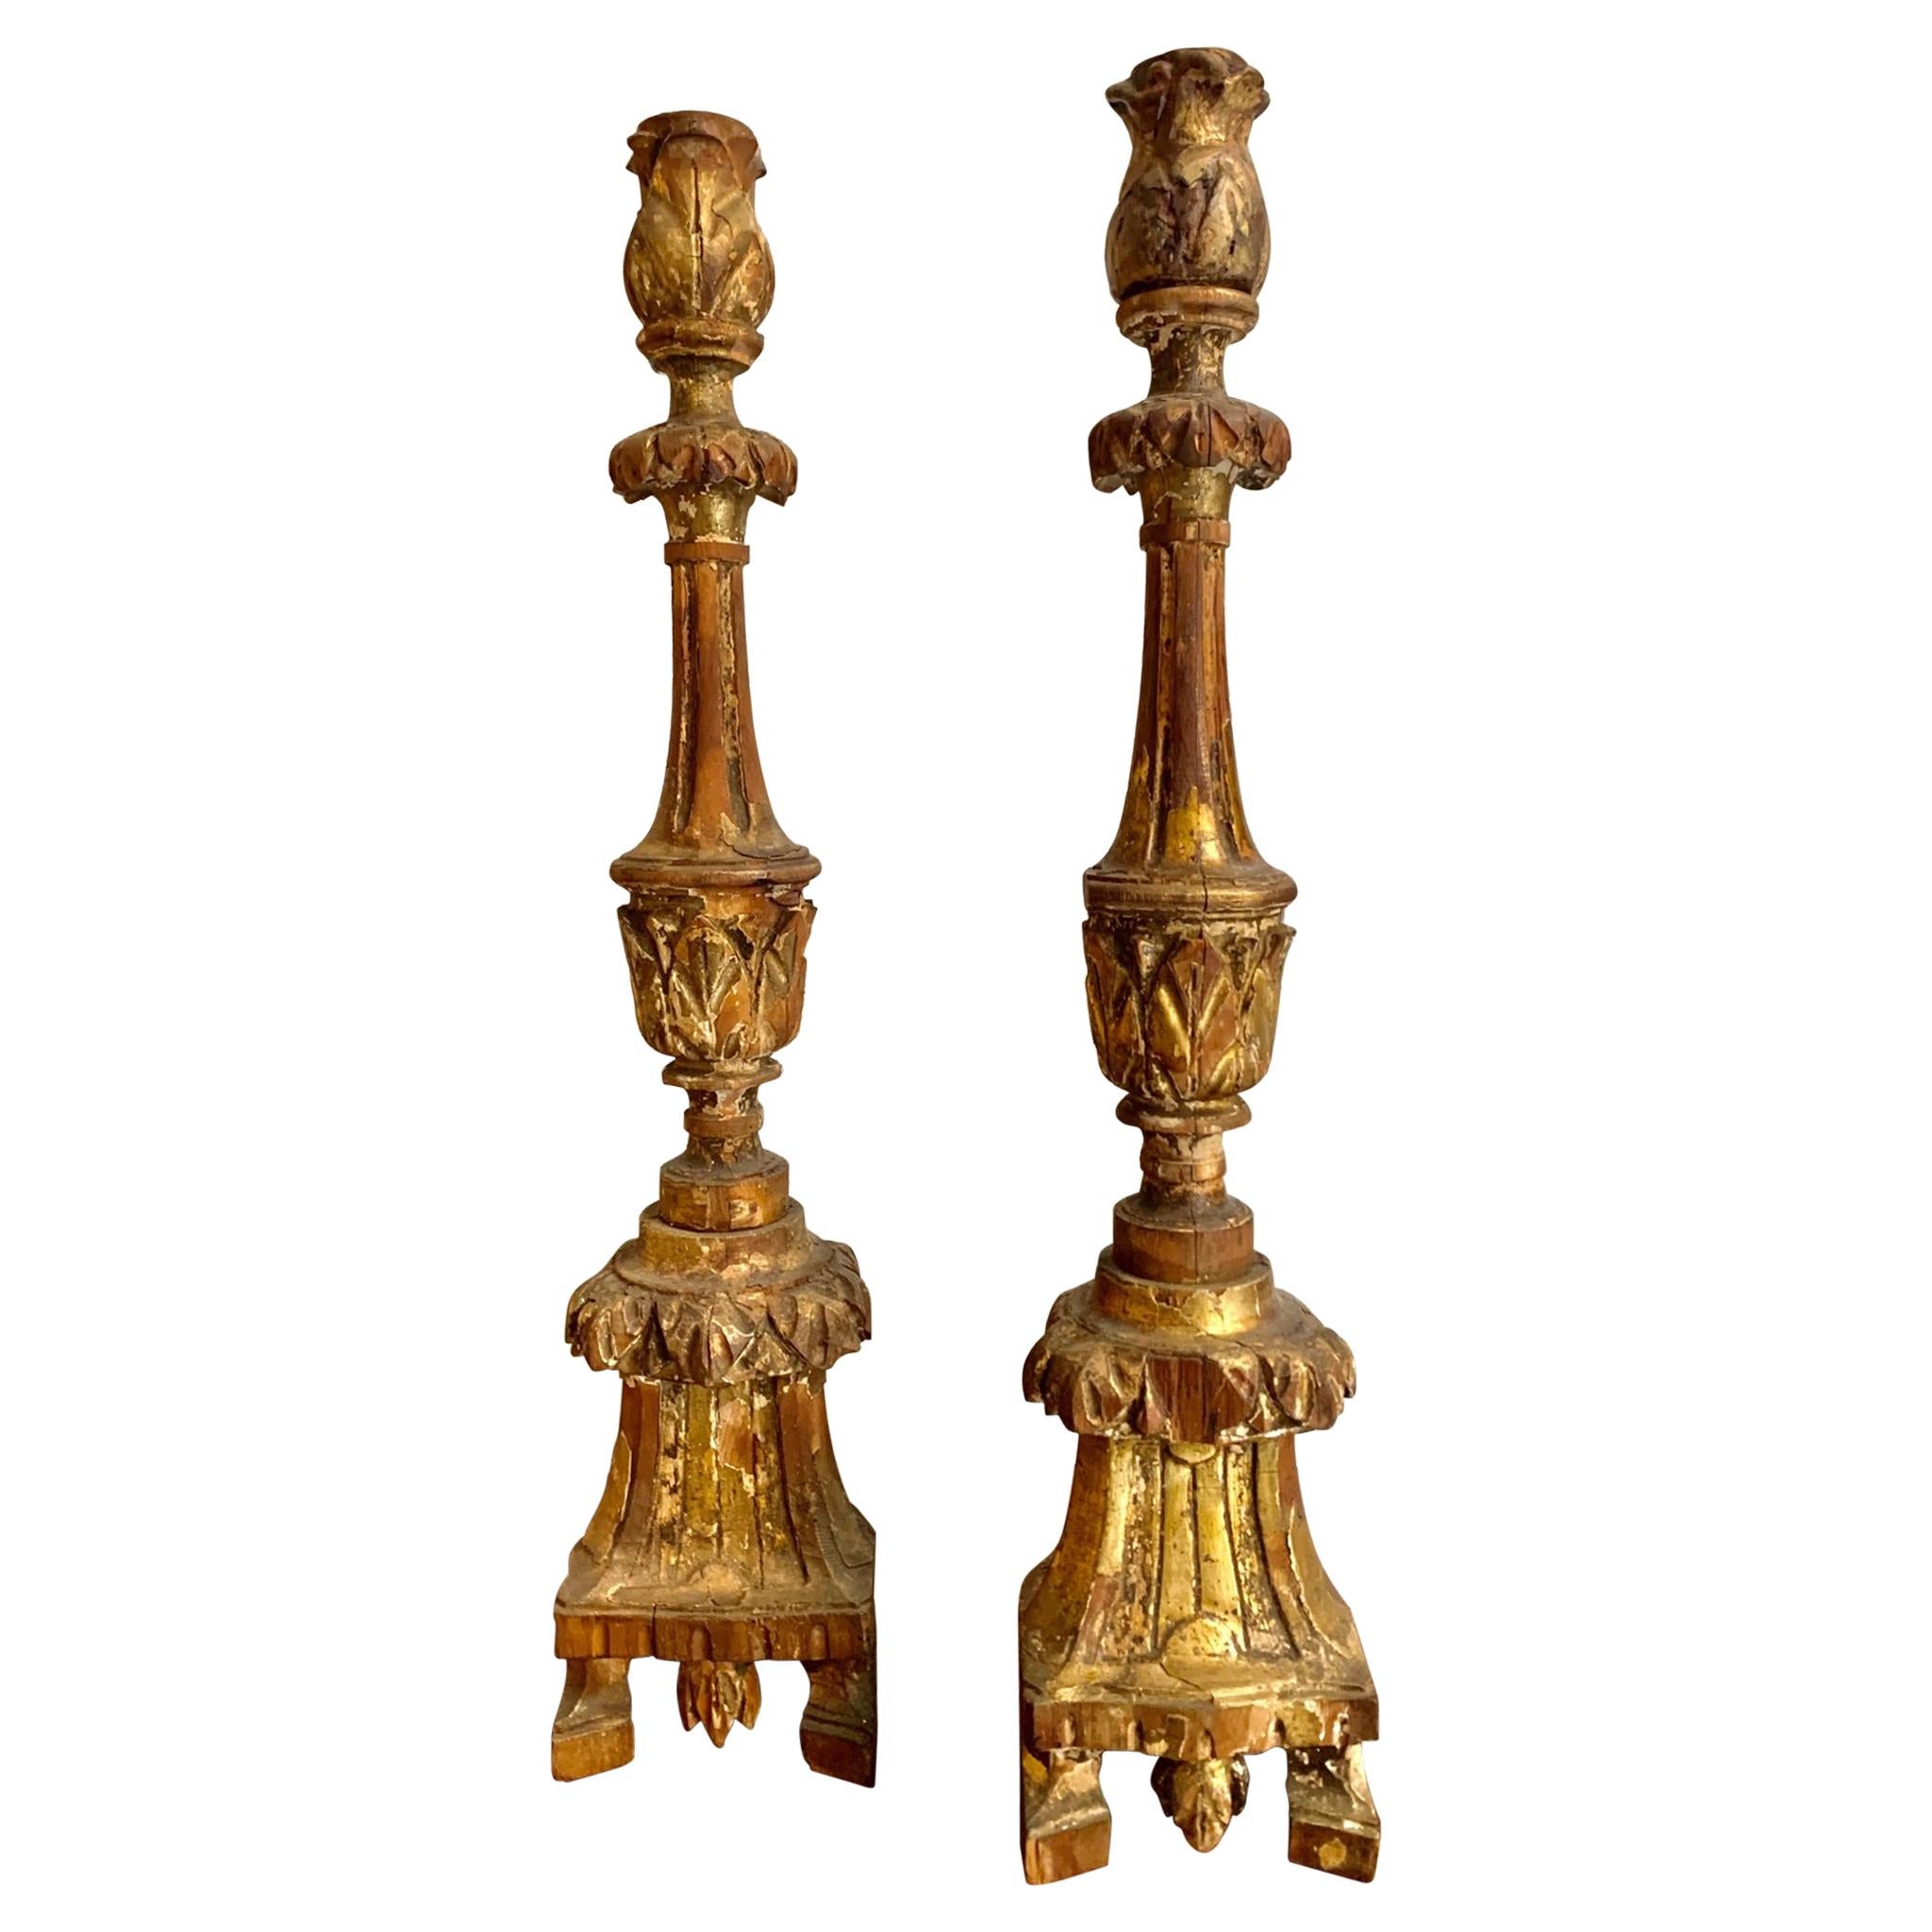 Pair of 18th Century Giltwood Portuguese Torchères